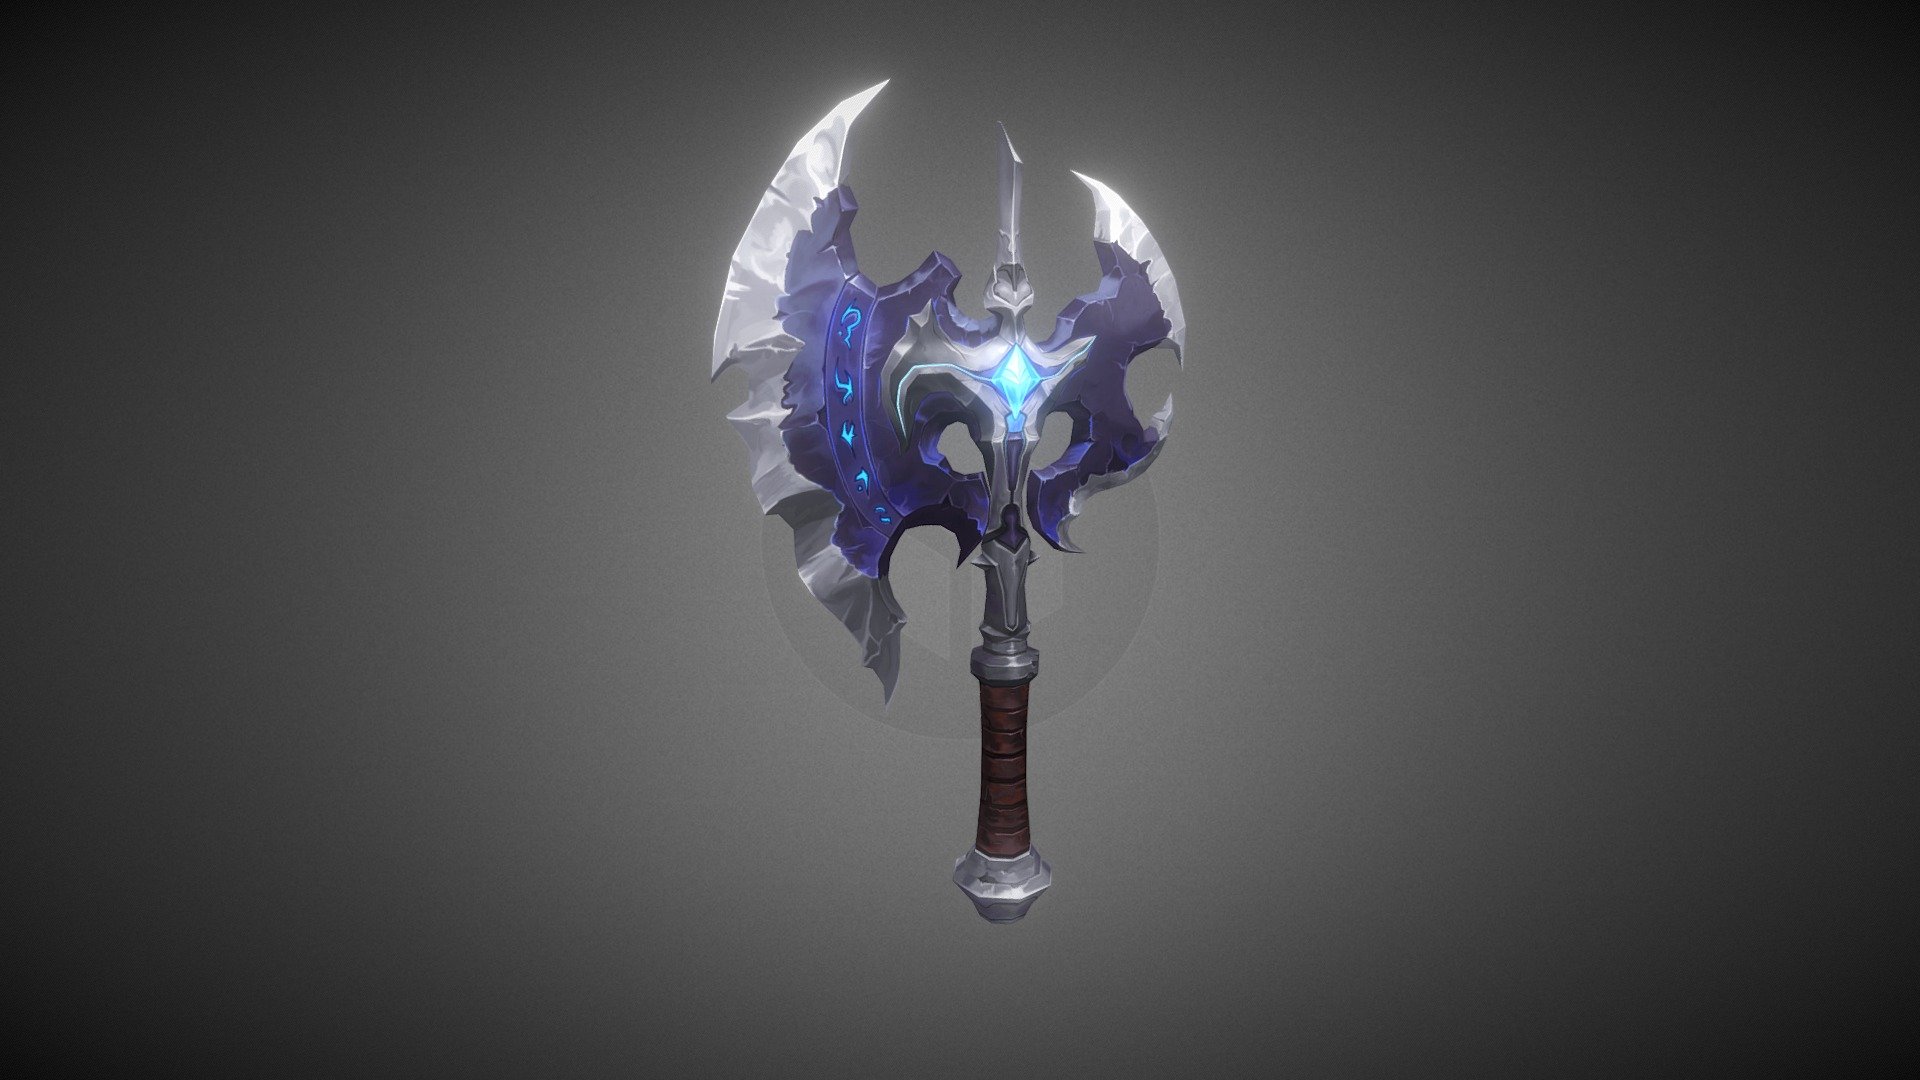 Low poly Blizzard style hand painted magic axe base on Jeff Chan's concept art on ArtStation (https://www.artstation.com/artwork/ExNav). 
Though it's free for download but I'm not sure it can be used for commercial purpose like my other 3D models, please consider before use.
Leave a like or comment if you like my stuff. Thanks 3d model